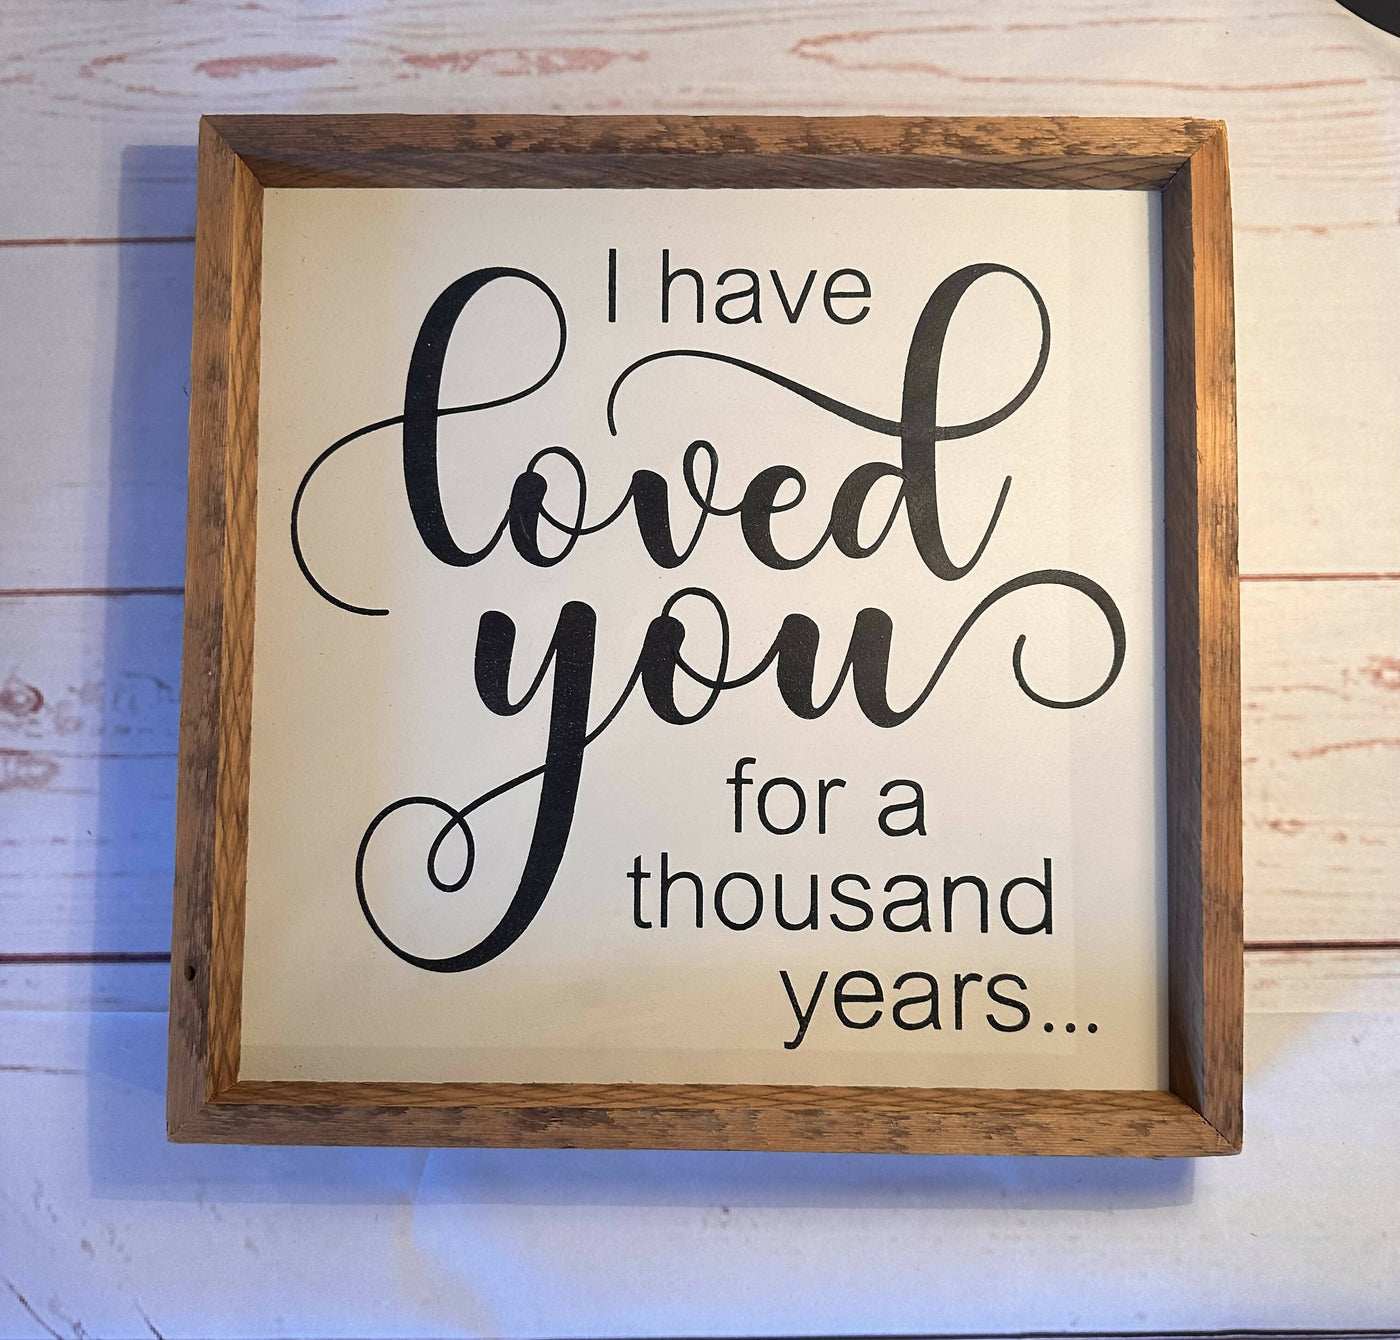 Loved you sign